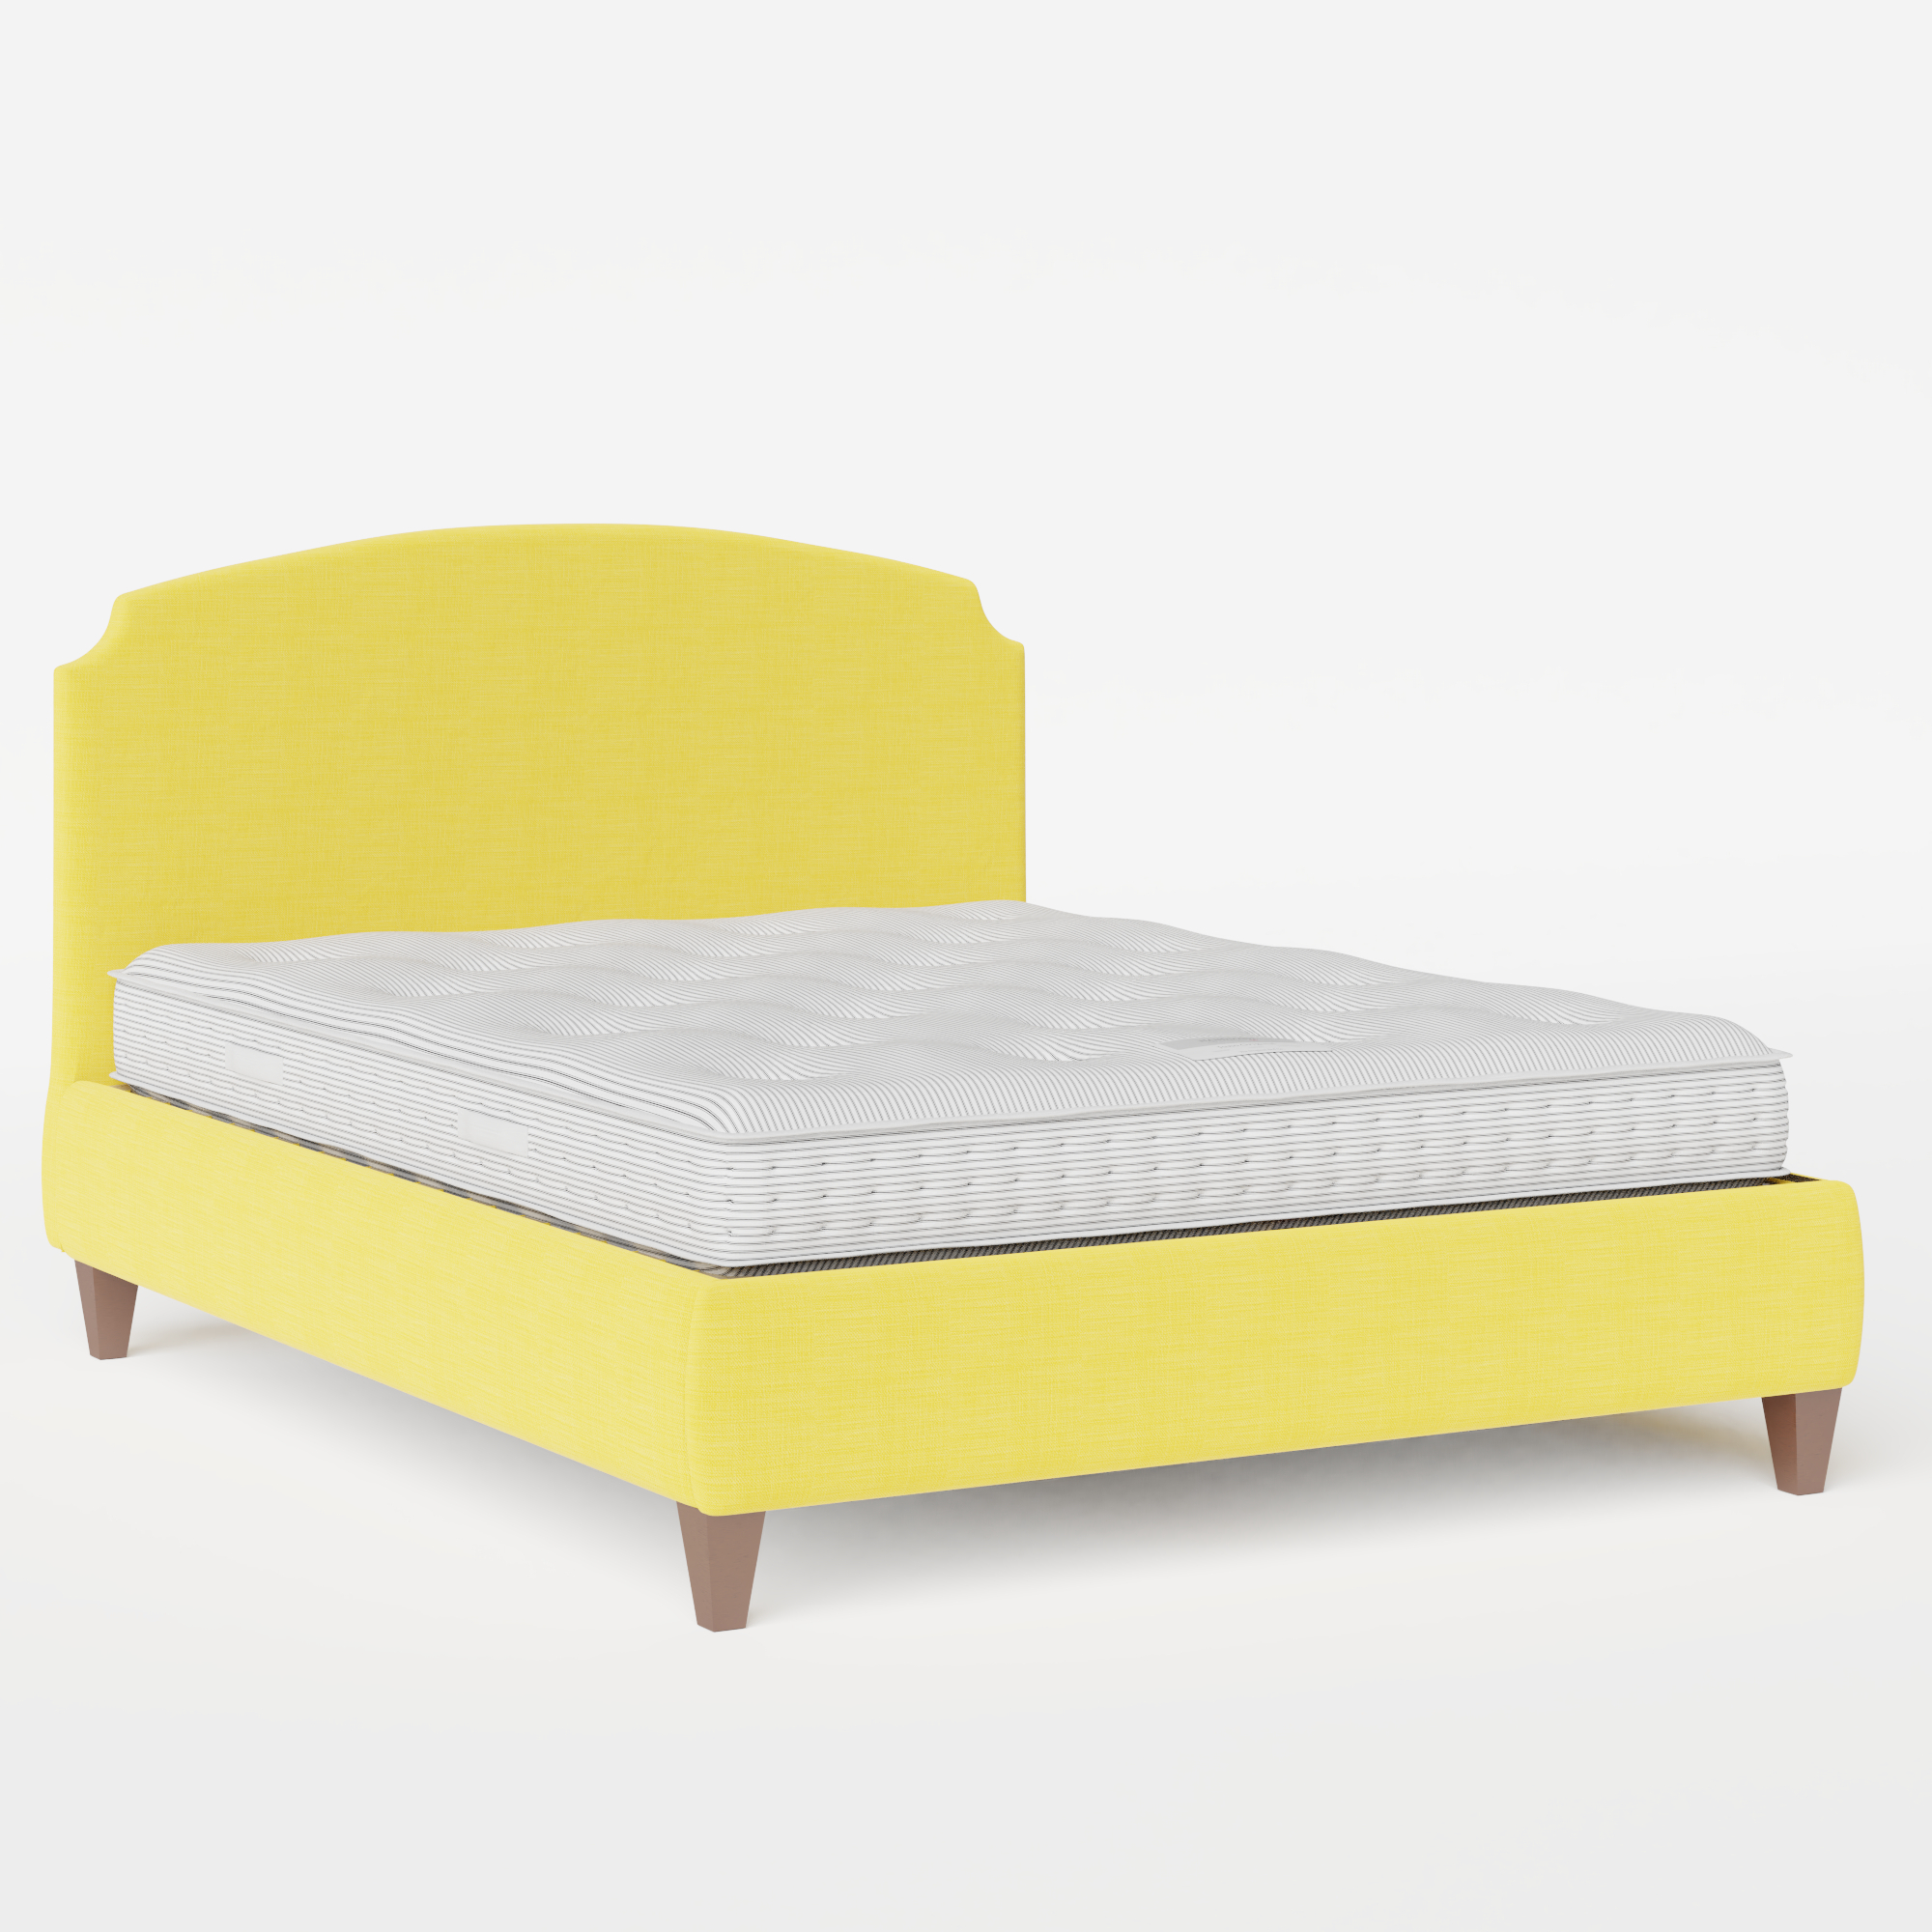 Lide upholstered bed in sunflower fabric